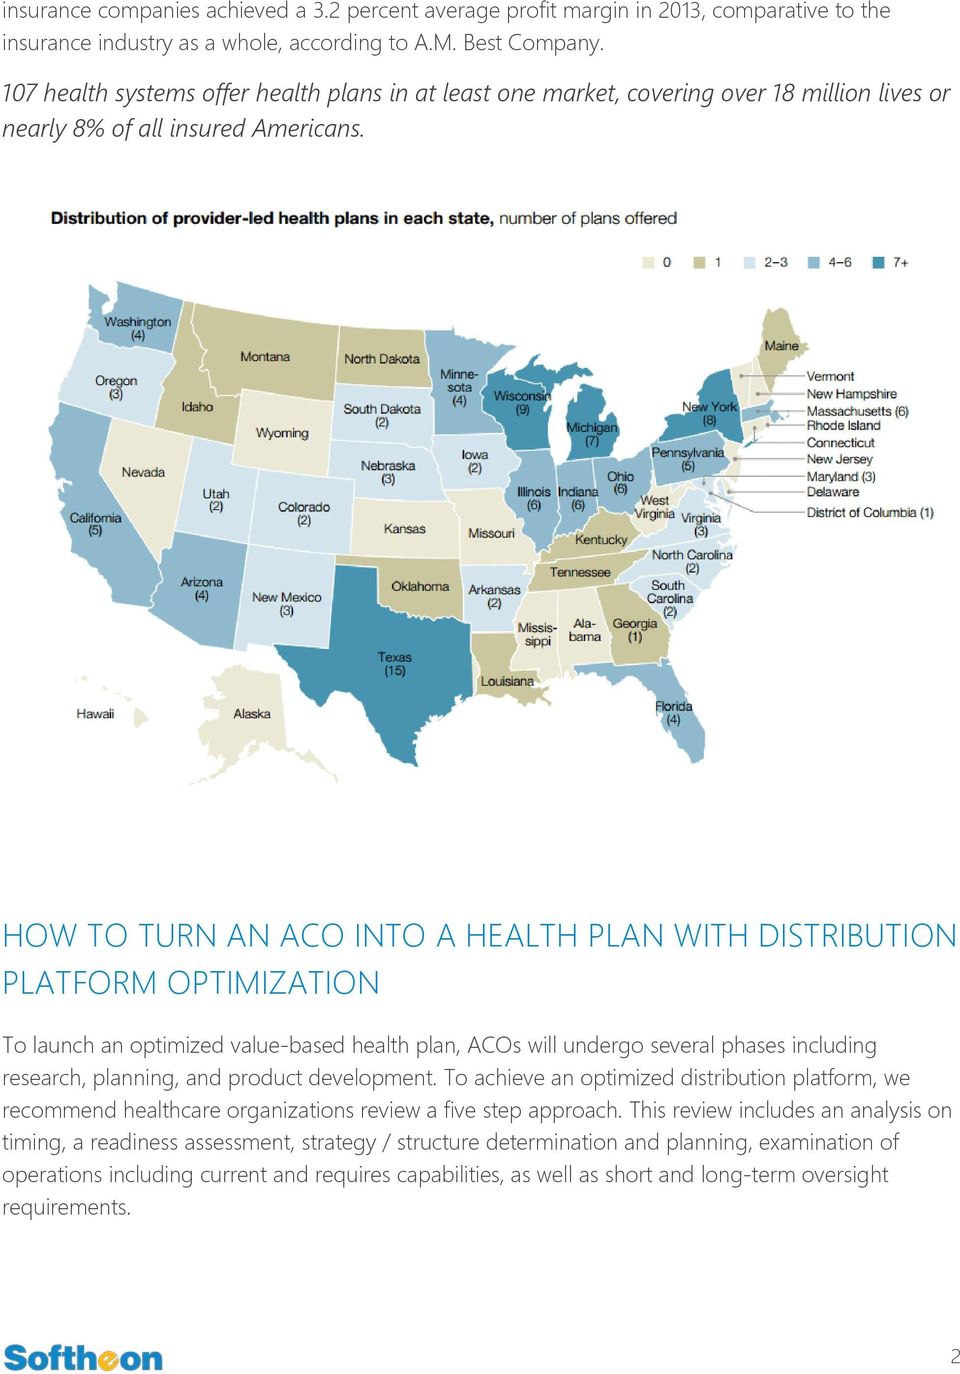 HOW TO TURN AN ACO INTO A HEALTH PLAN WITH DISTRIBUTION PLATFORM OPTIMIZATION To launch an optimized value-based health plan, ACOs will undergo several phases including research, planning, and